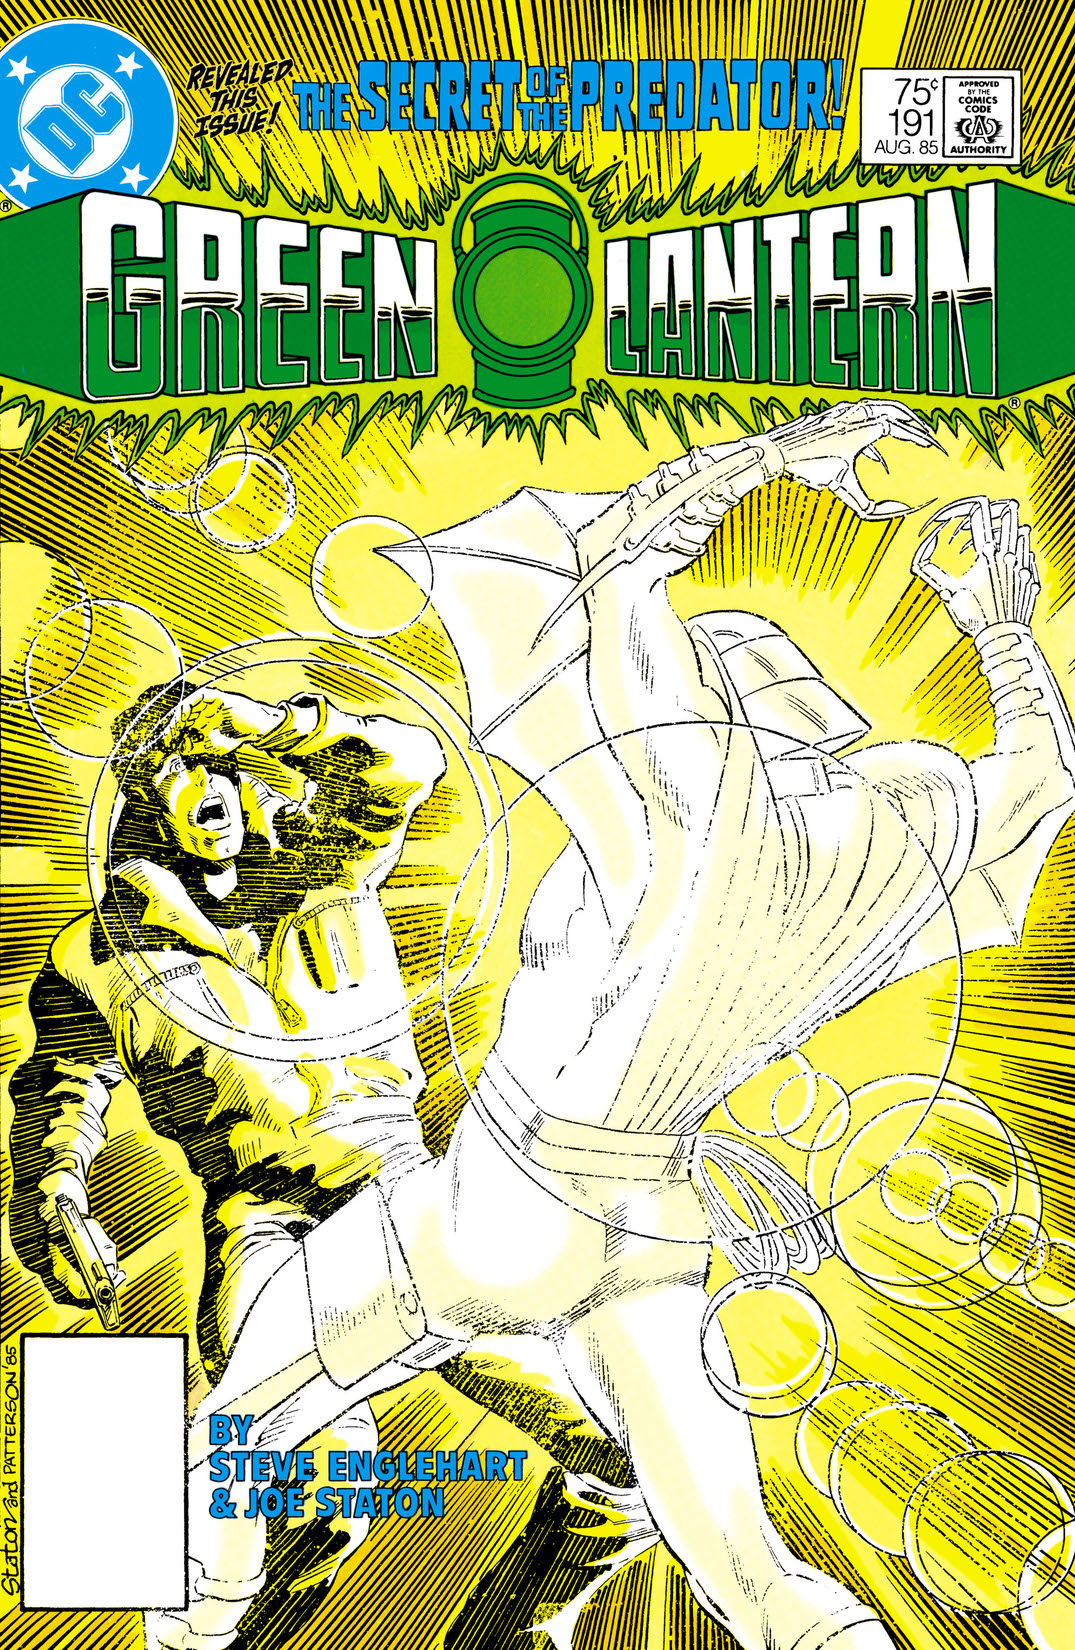 Green Lantern (1960-) #191 preview images